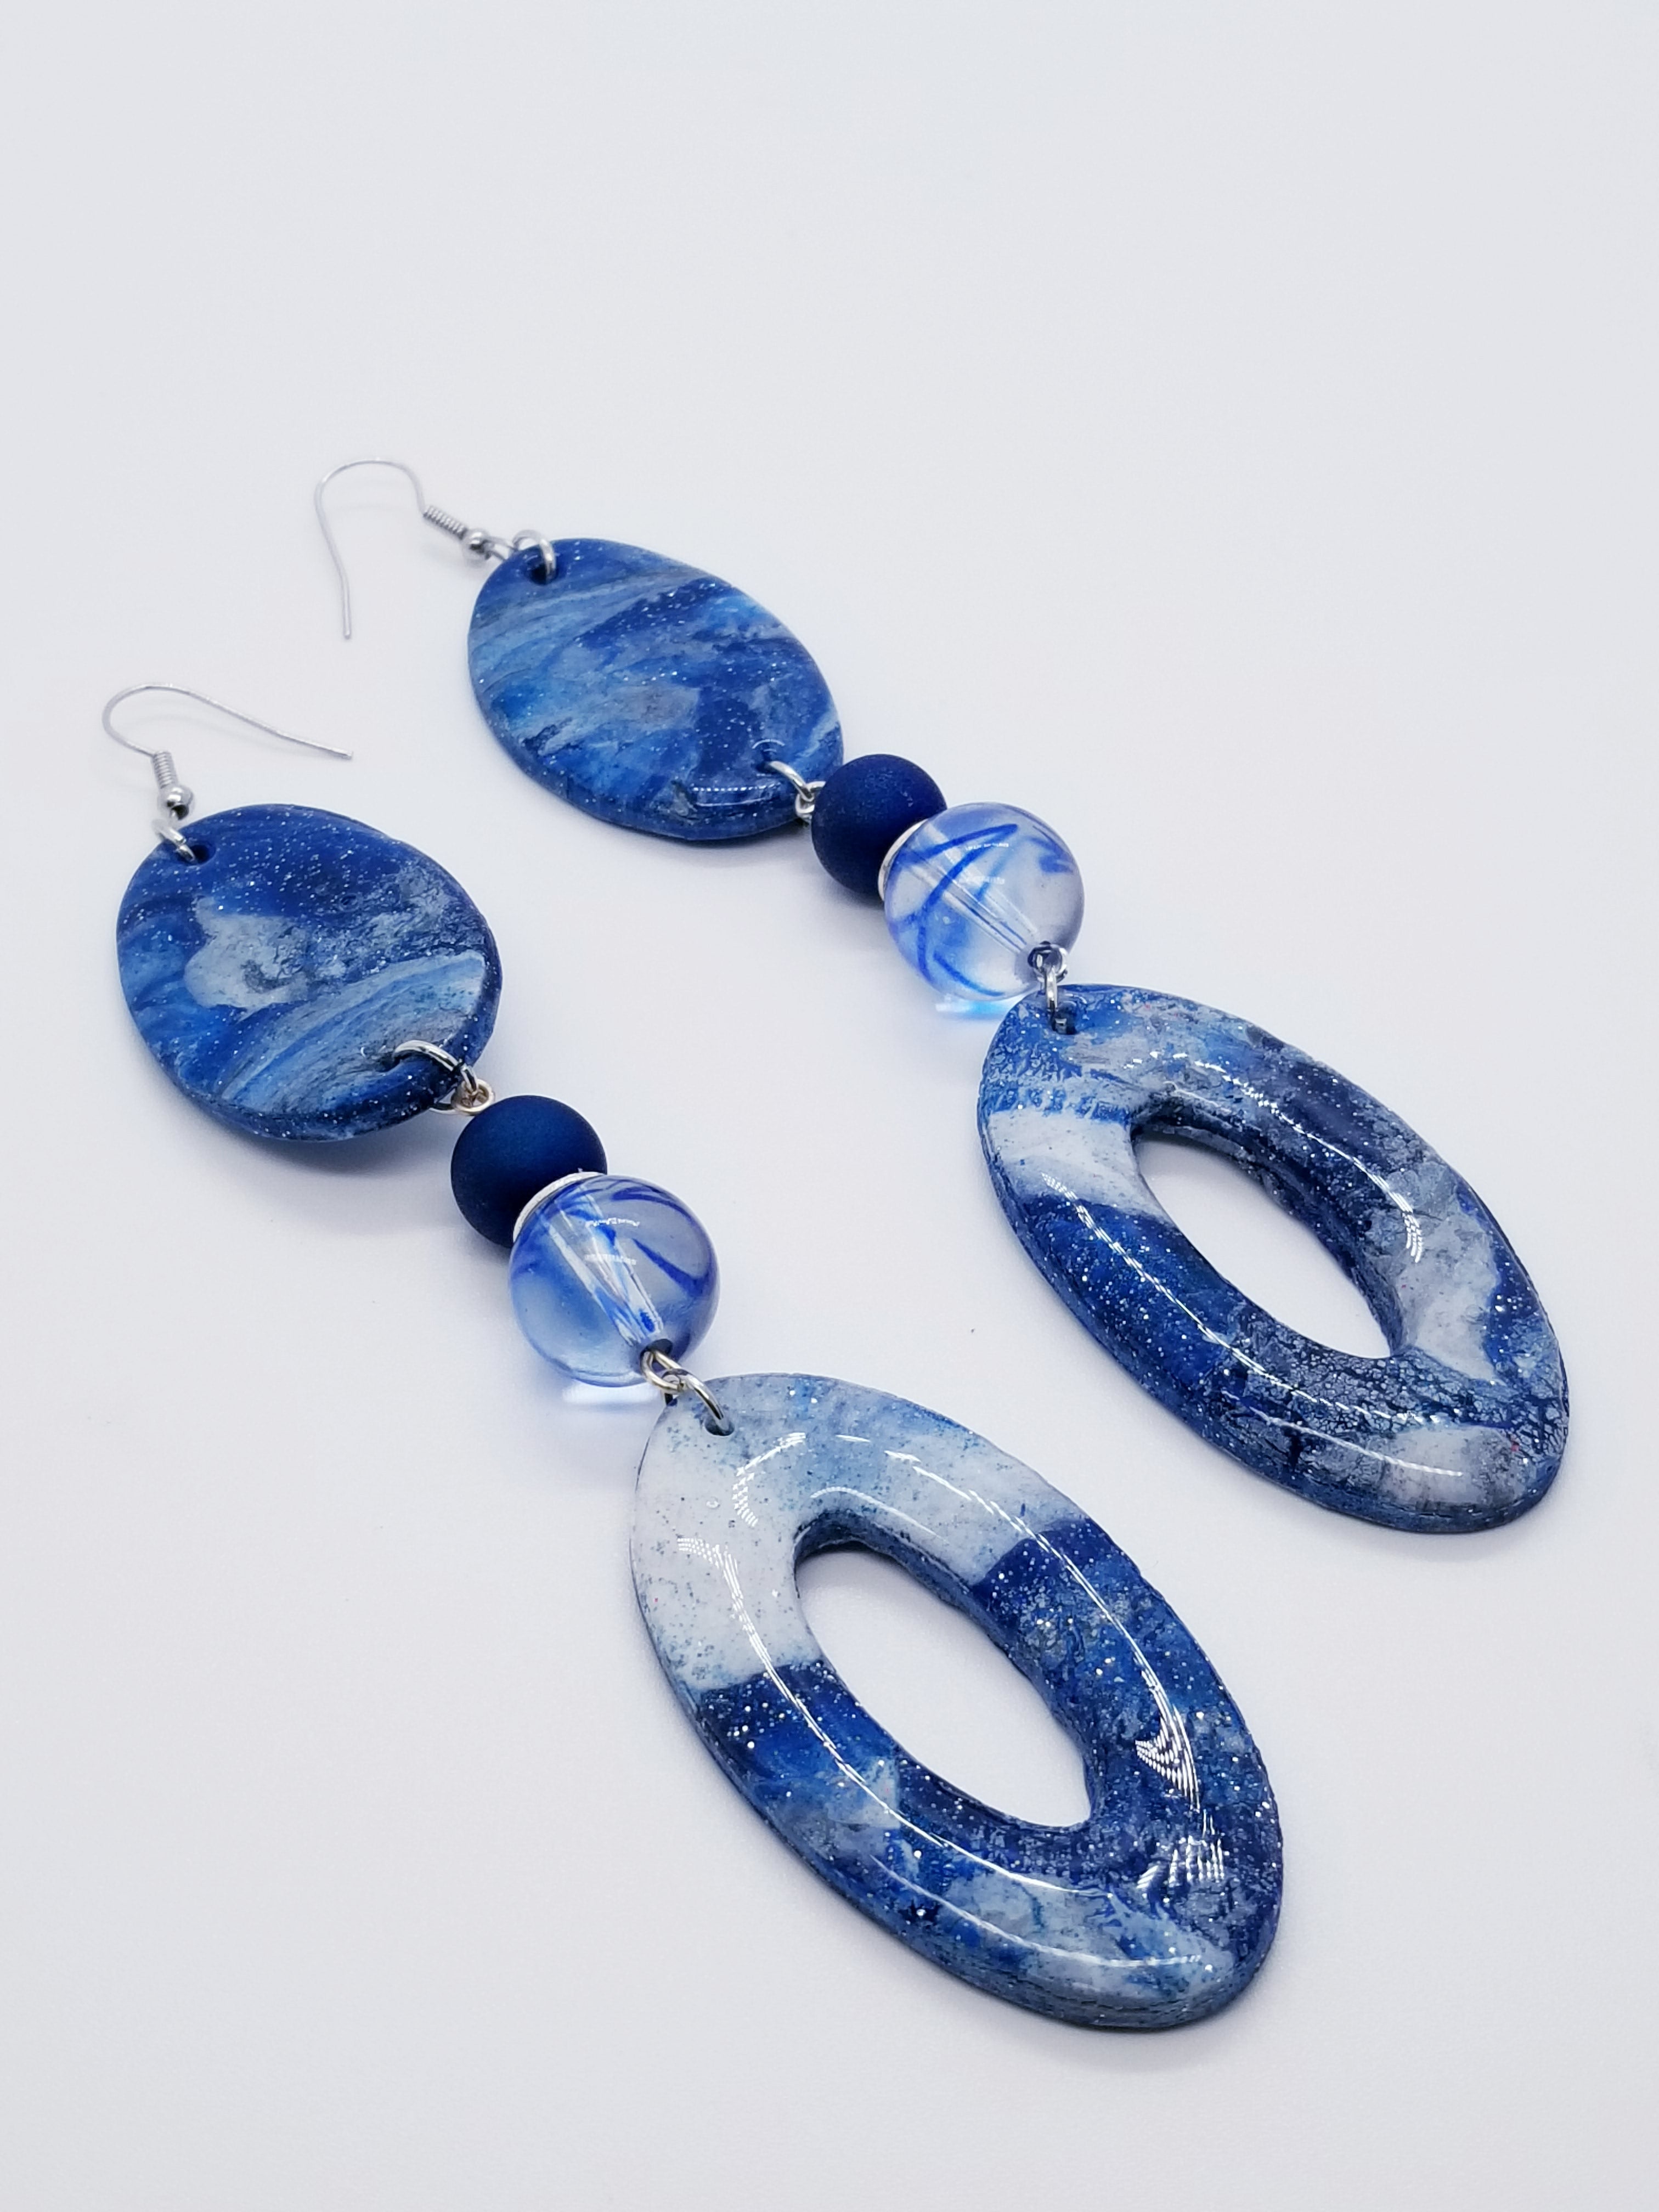 PLEASE BE AWARE: Earrings Hang Past Shoulders   Length: 5.5 inches | Weight: 1 ounce  Distinctly You! The earrings are handmade using blue and silver swirl polymer clay design with resin overlay, 12mm blue swirl glass beads, 10mm blue Druzy Agate beads, silver rondelle spacers, silver head pins, and hypoallergenic hooks with back closures. 